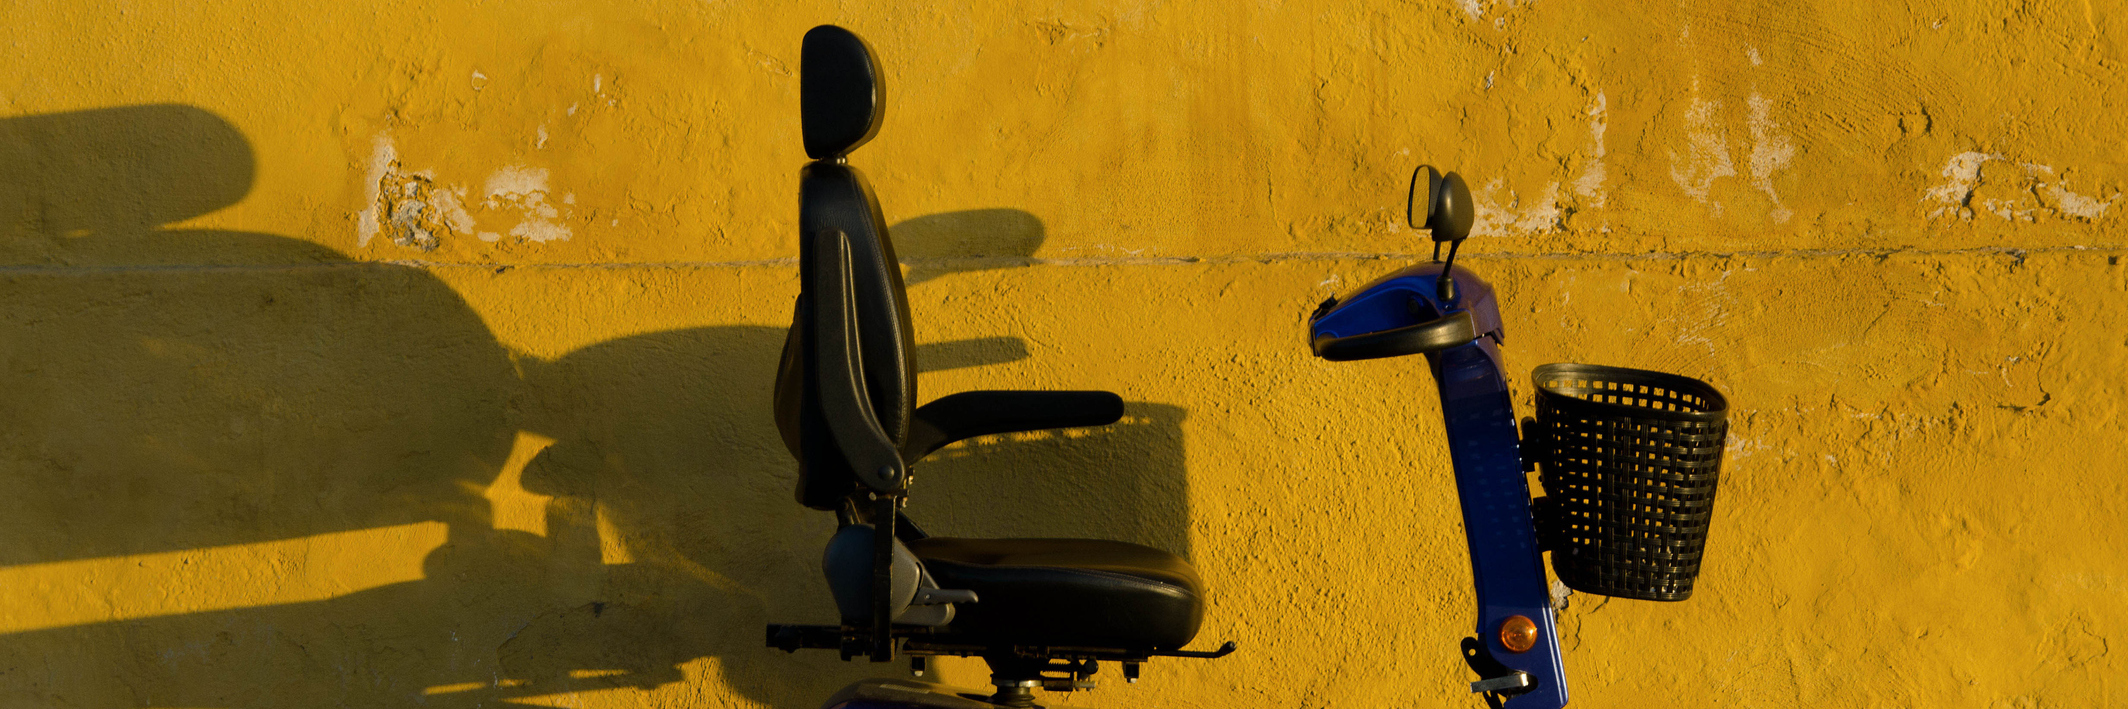 Blue scooter against yellow wall.